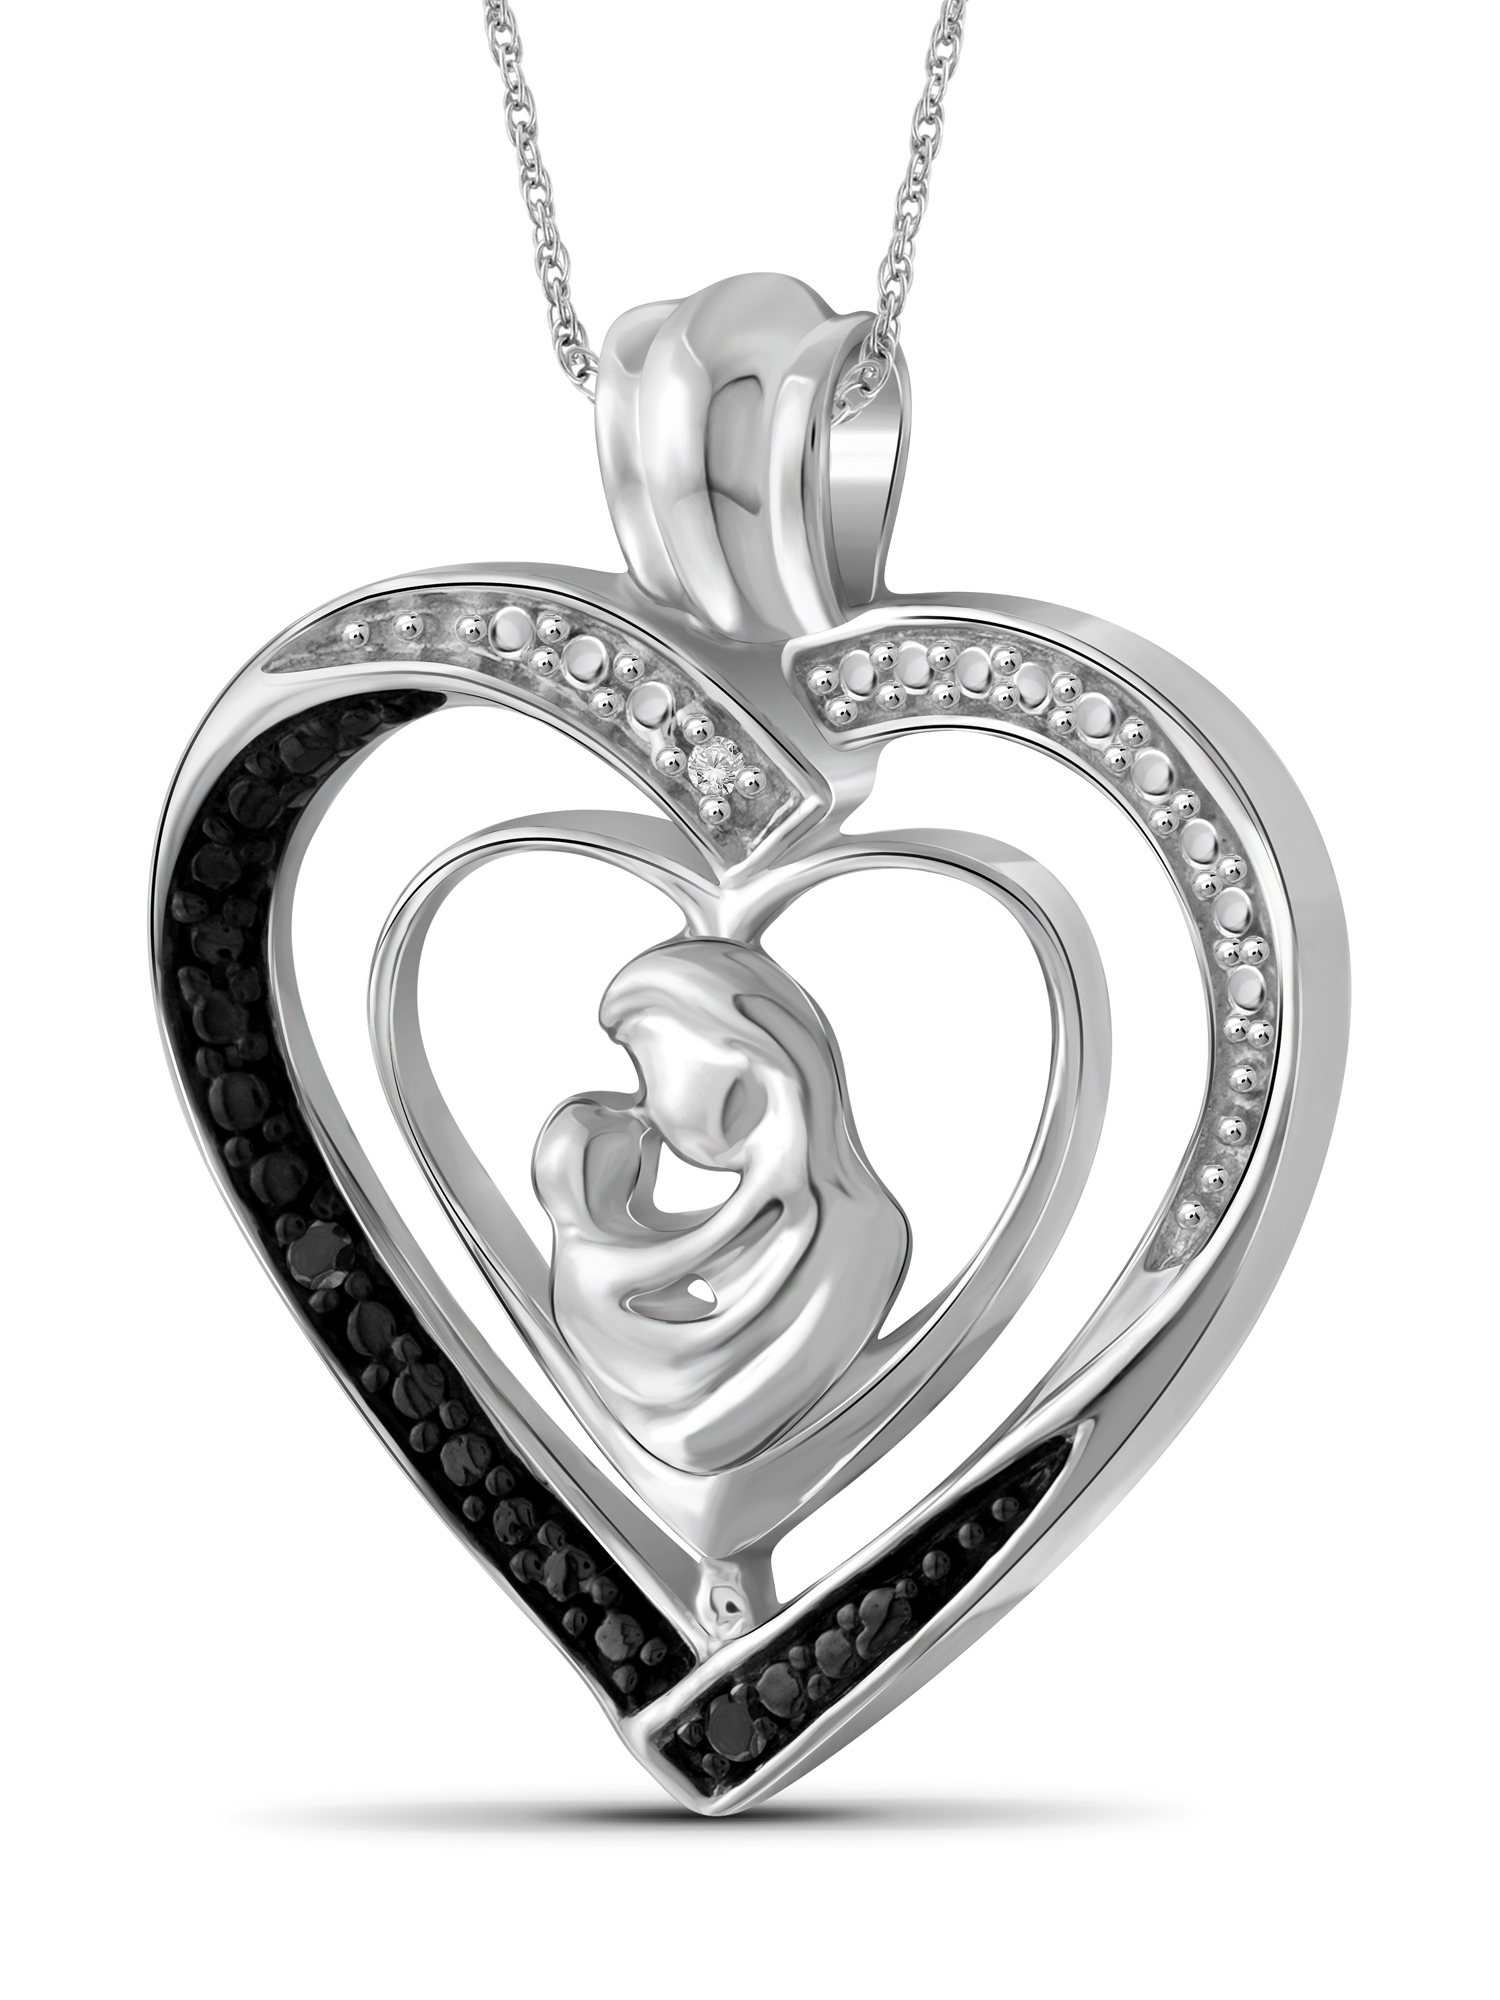 JewelersClub Mom Necklace 0.925 Sterling Silver Necklace for Women – Beautiful Accent Black & White Diamonds + 0.925 Sterling Silver Mother Daughter Necklace – Mothers Day Gifts Necklaces for Women - image 5 of 5